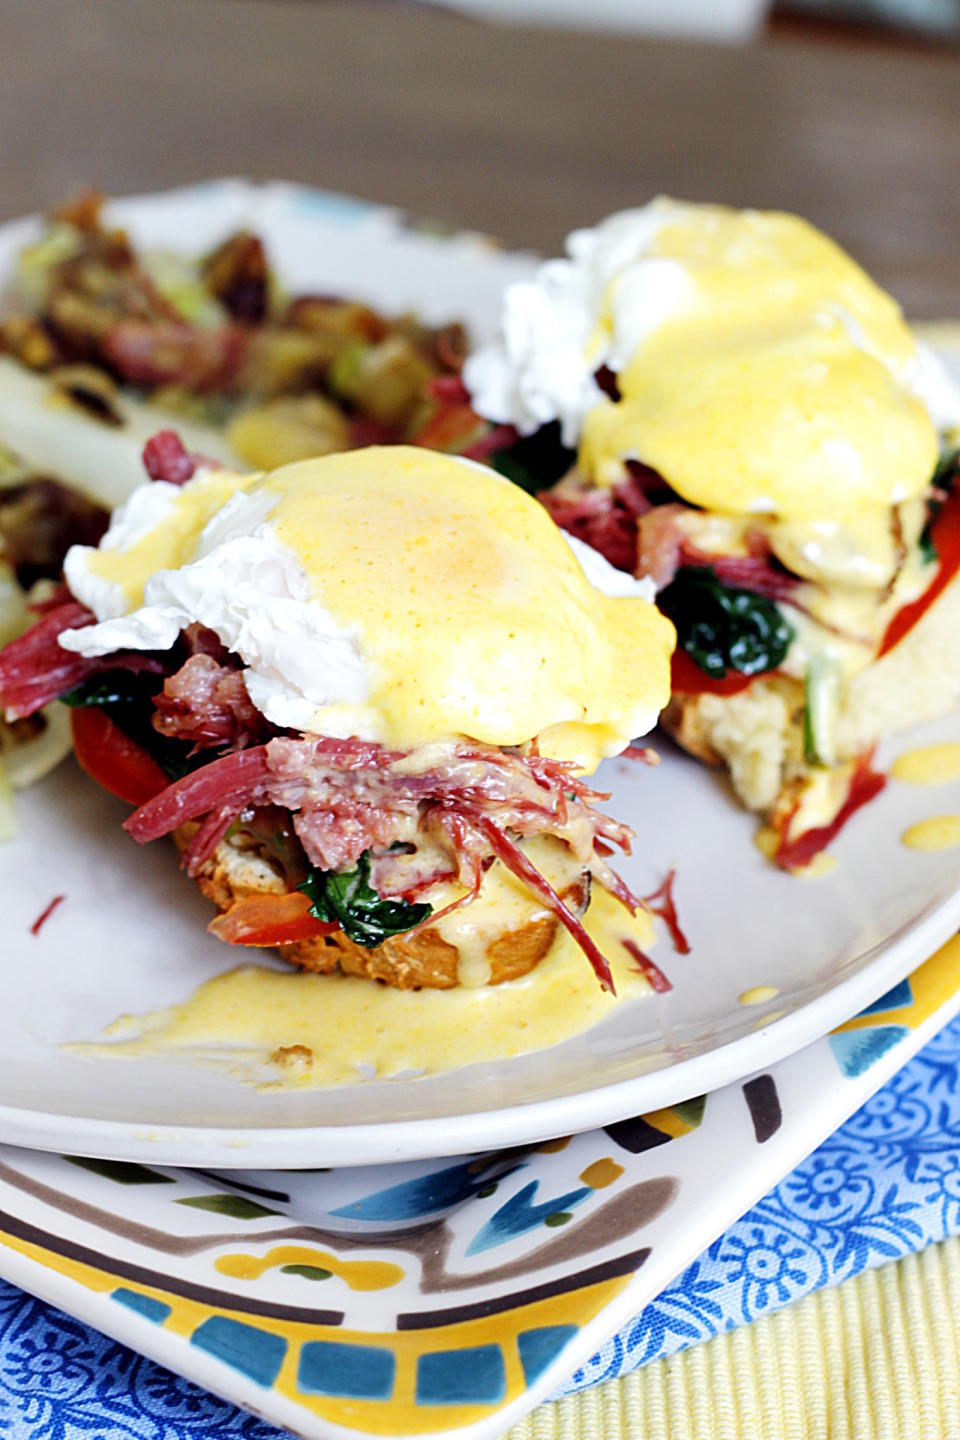 <strong>Get the<a href="http://fabtasticeats.com/2013/03/18/irish-eggs-benedict-with-corned-beef-and-cabbage-hash/" target="_blank"> Irish Eggs Benedict recipe</a> from Fabtastic Eats</strong>